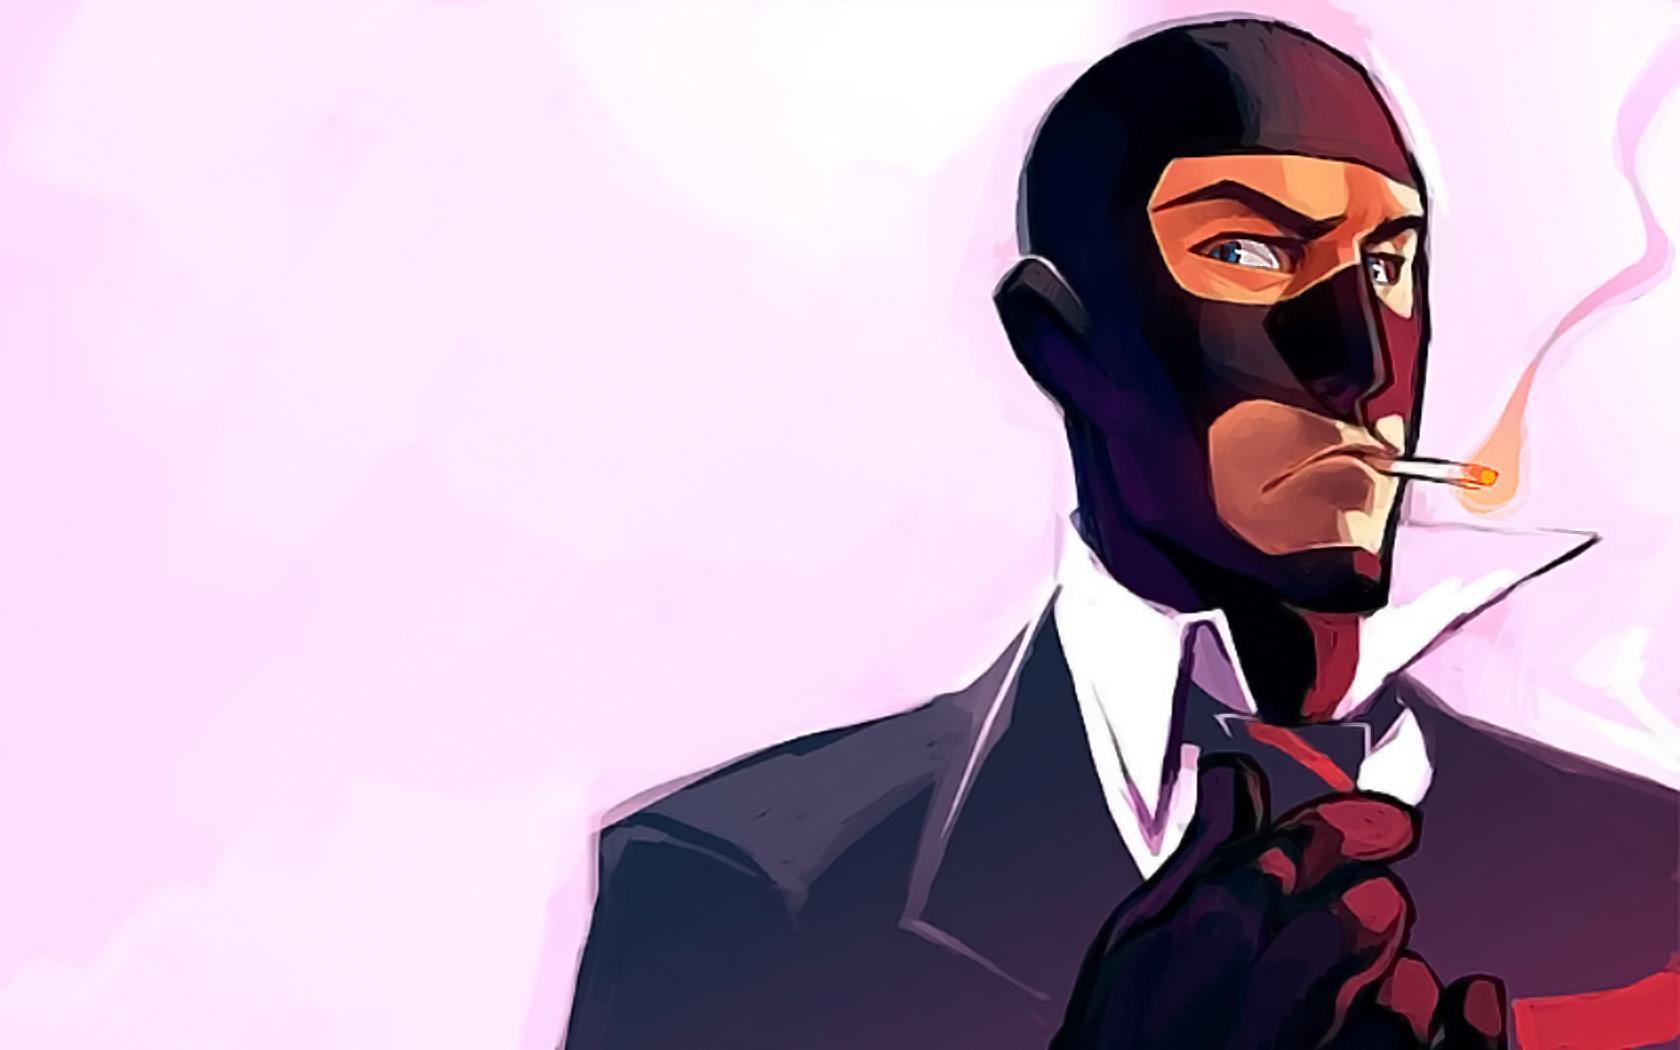 image For > Tf2 Spy Wallpaper 1366x768